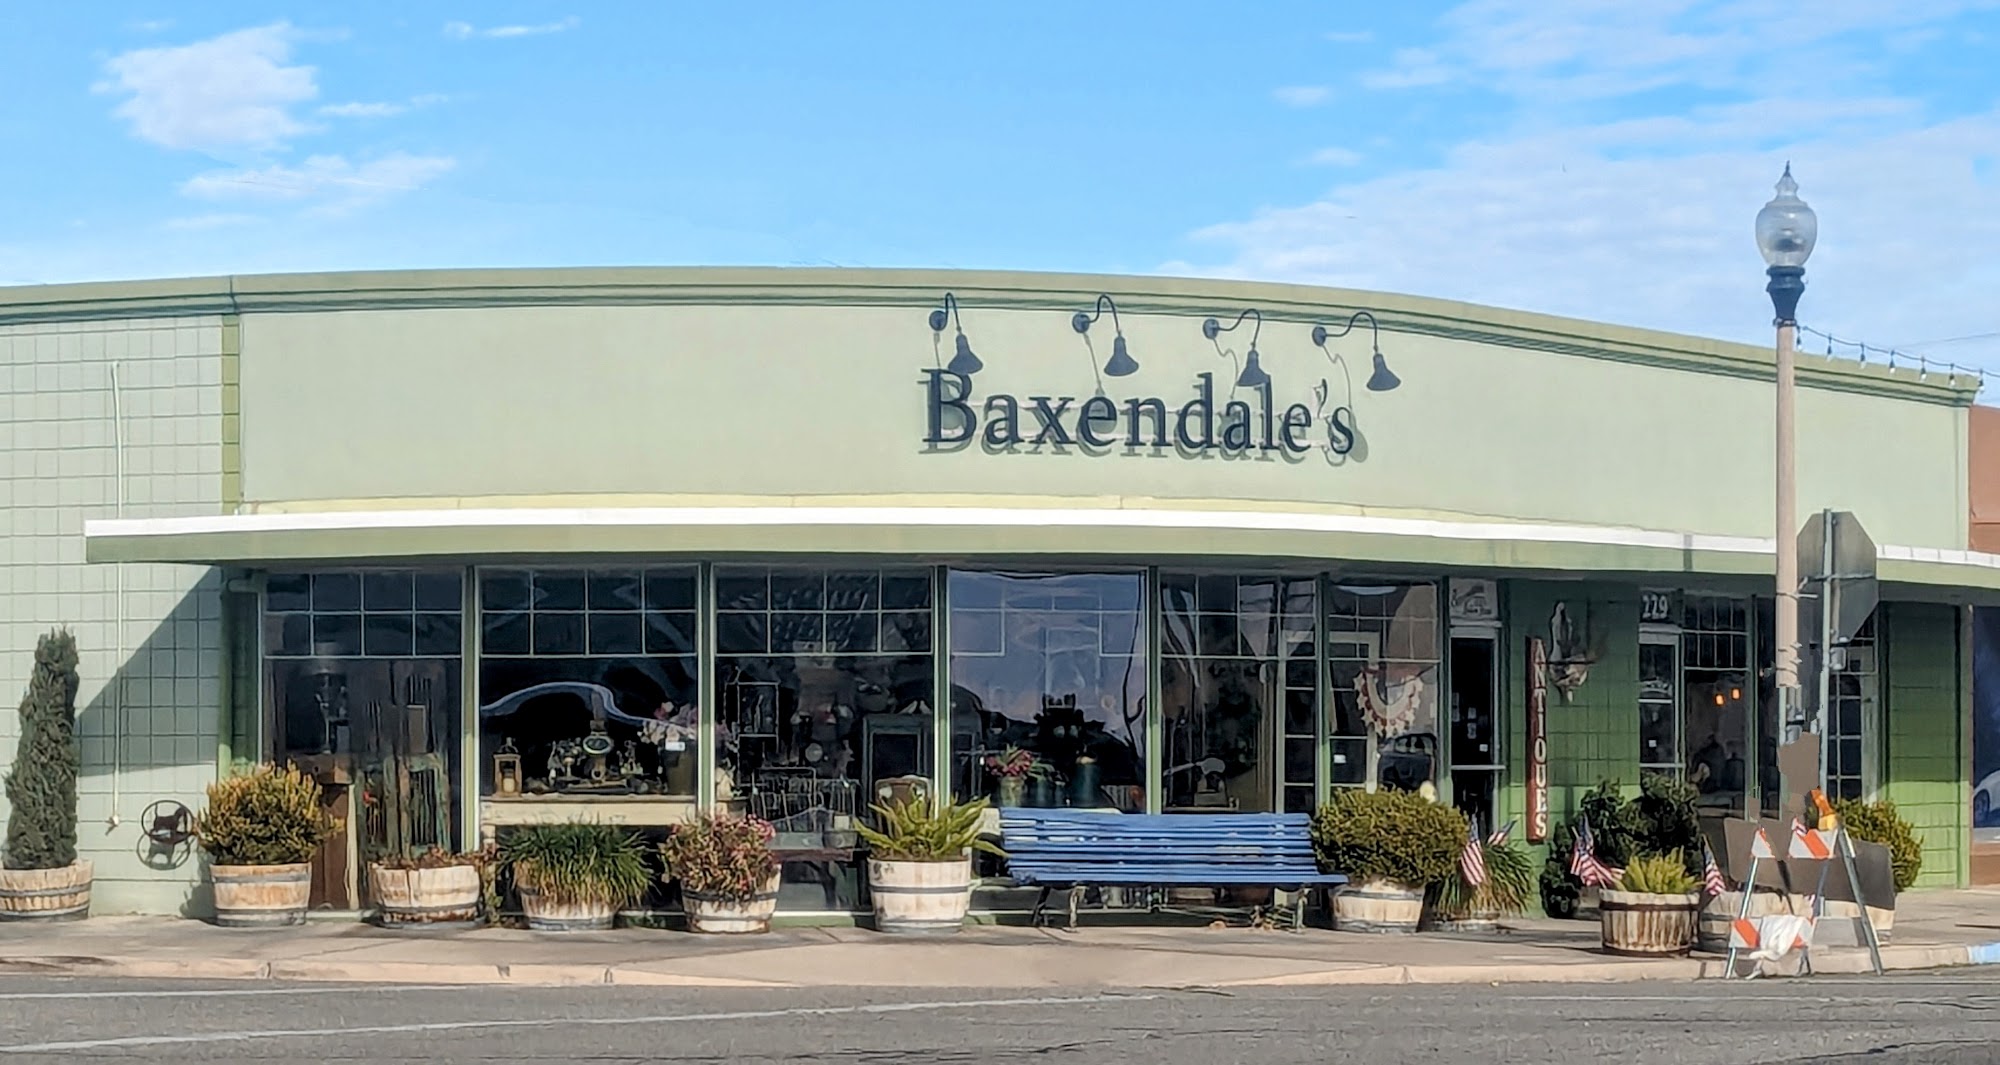 Baxendale's